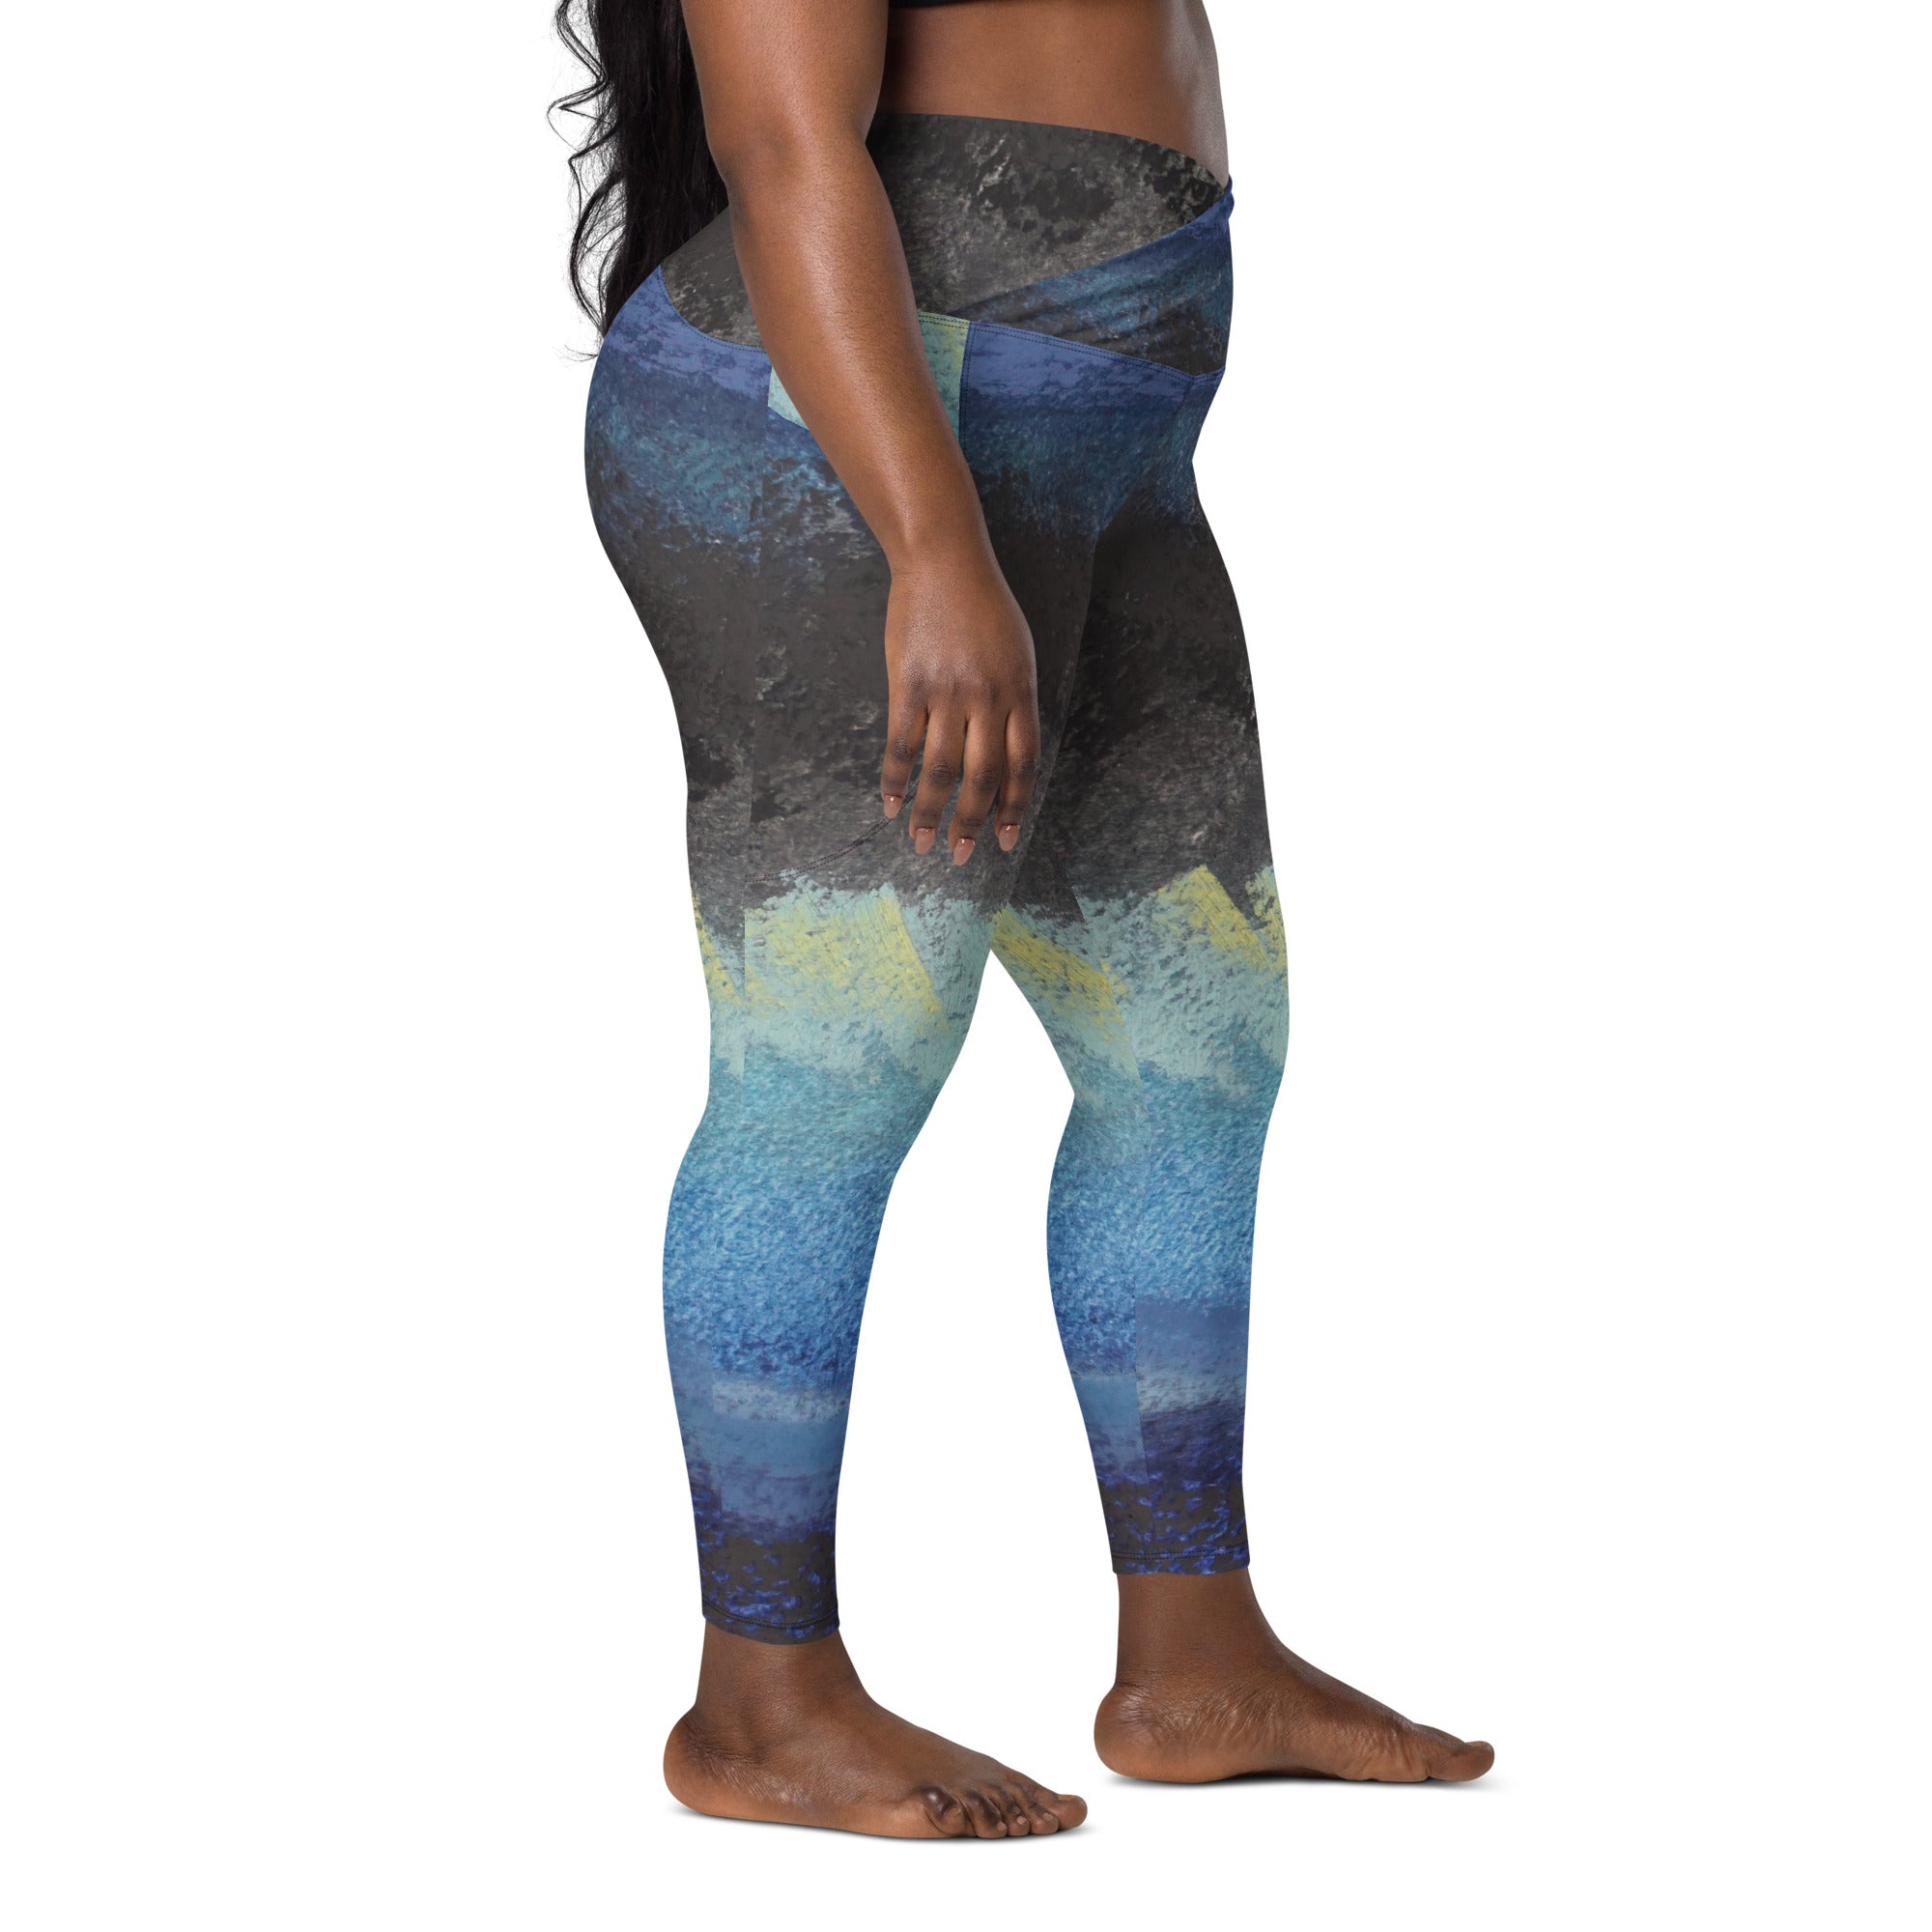 Find your Flat Road ~ Crossover leggings with pockets